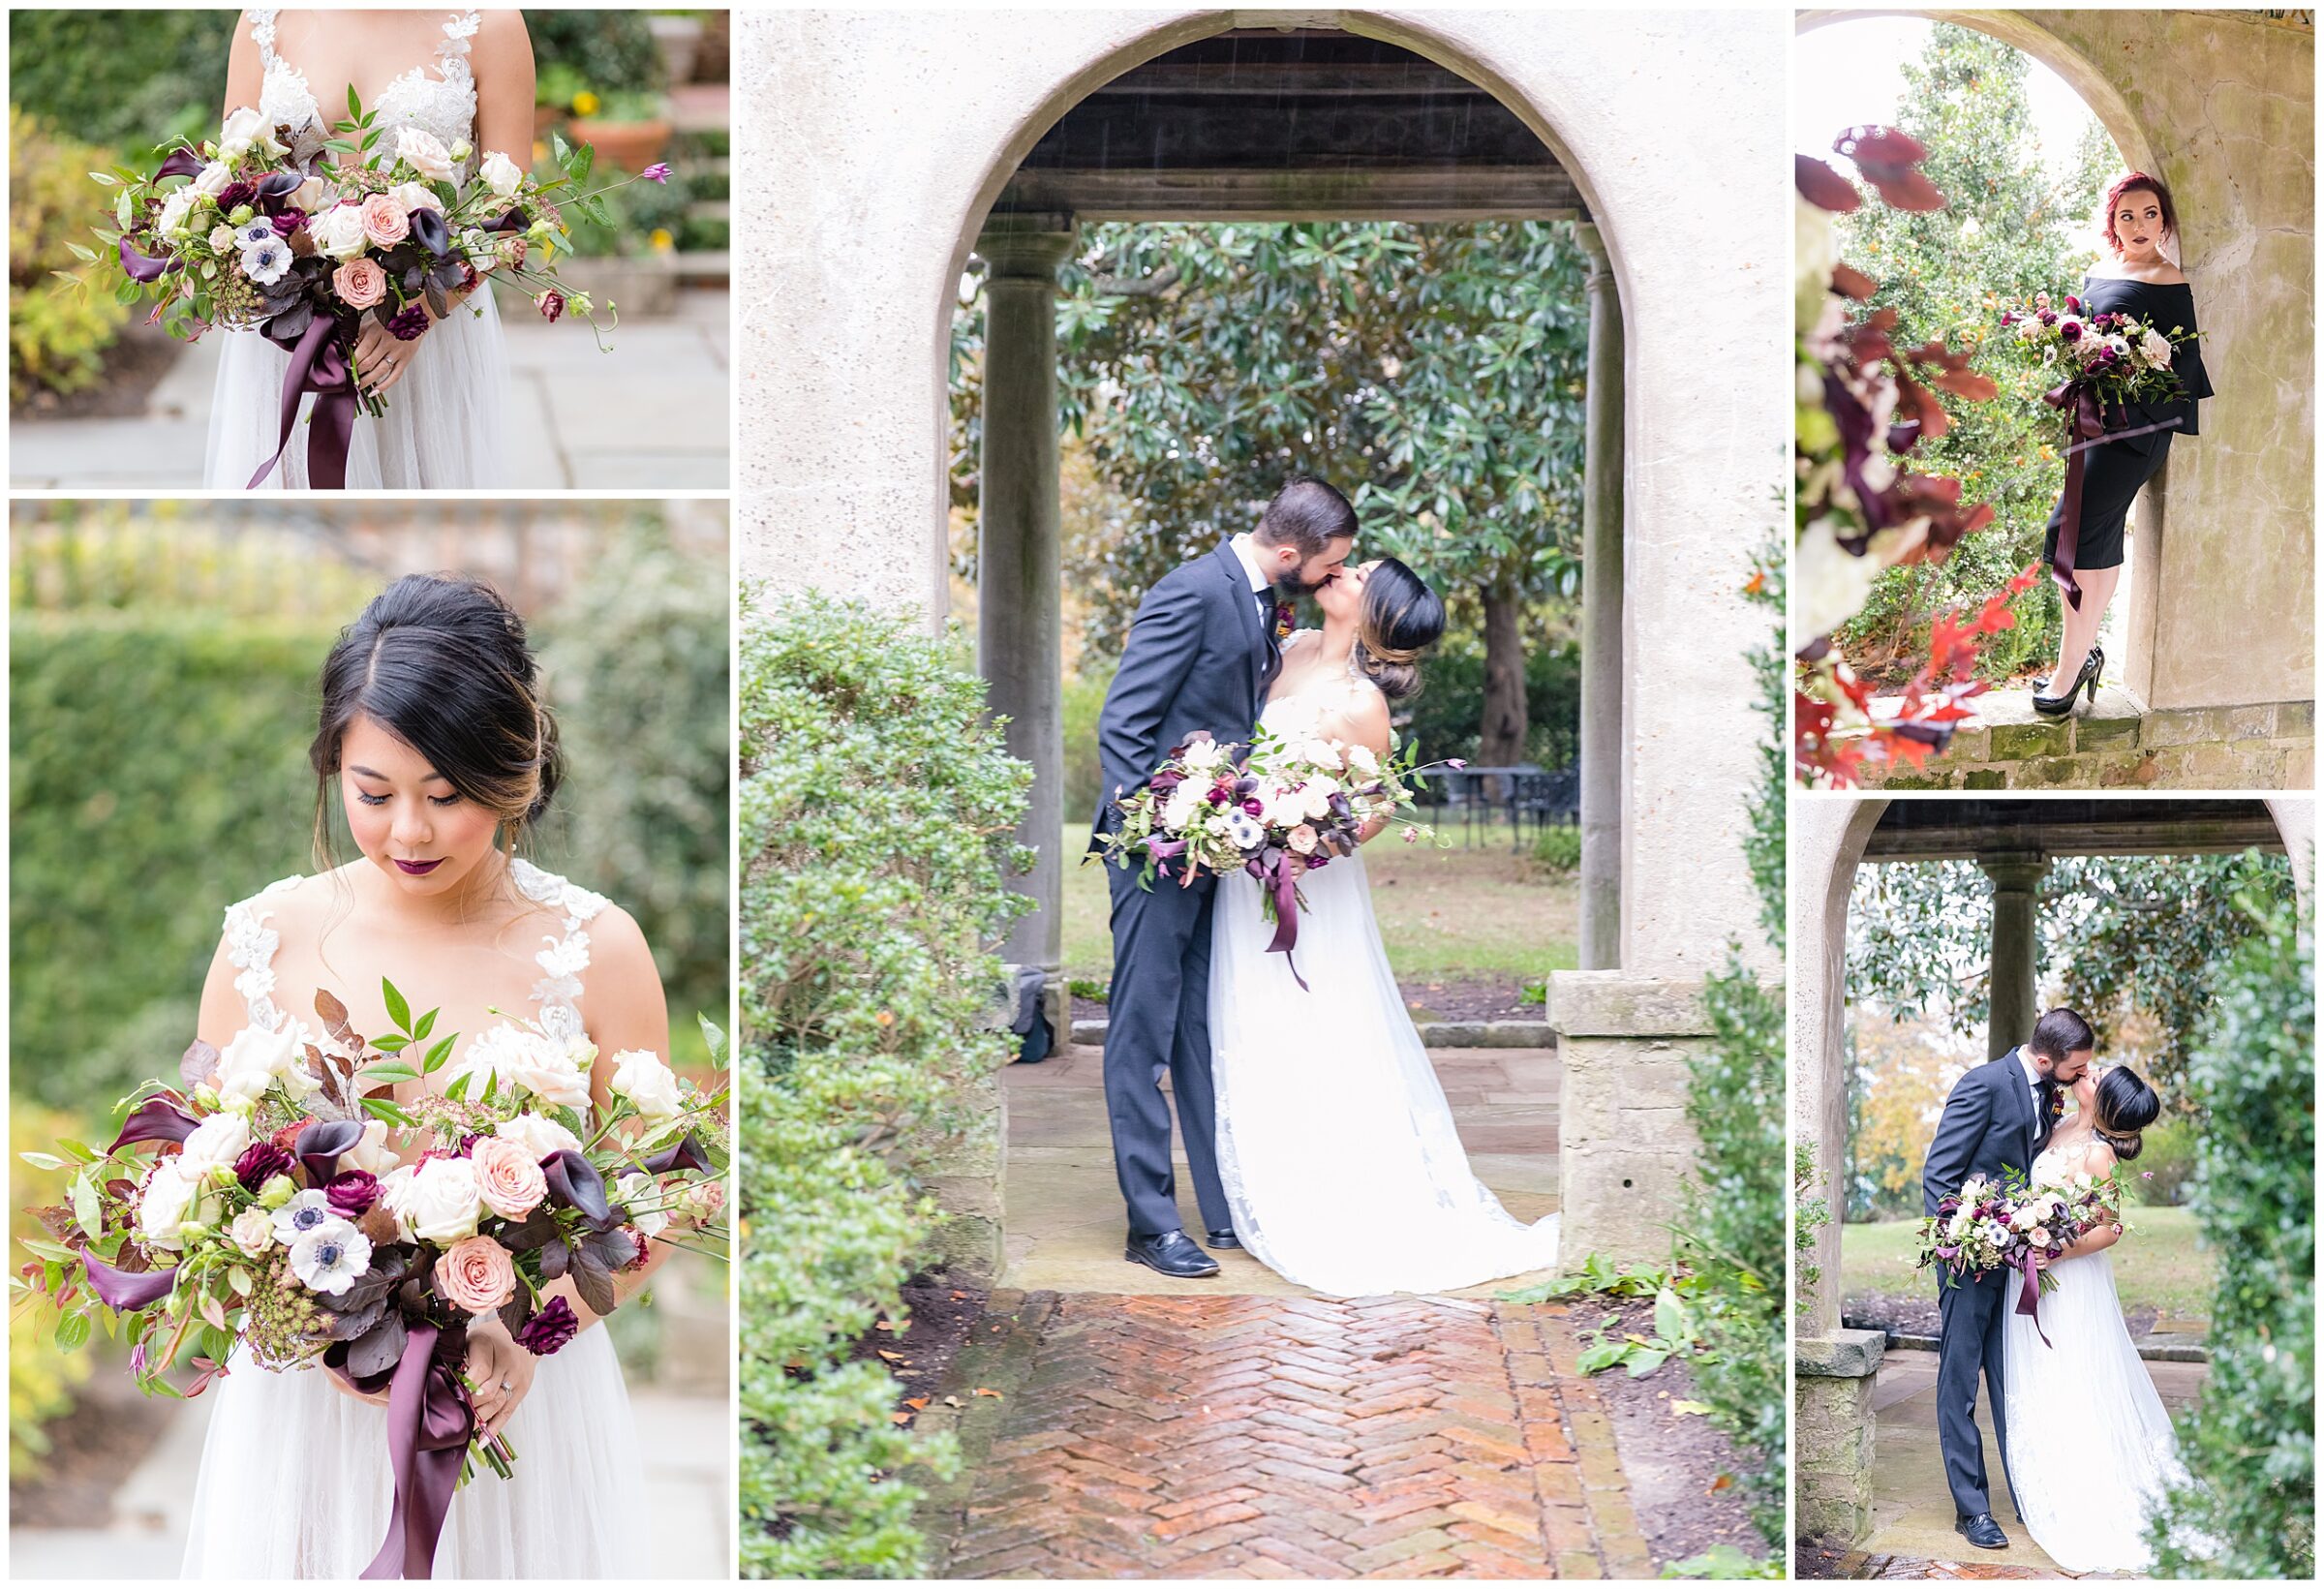 Styled session showing off arches at the historic Virginia House